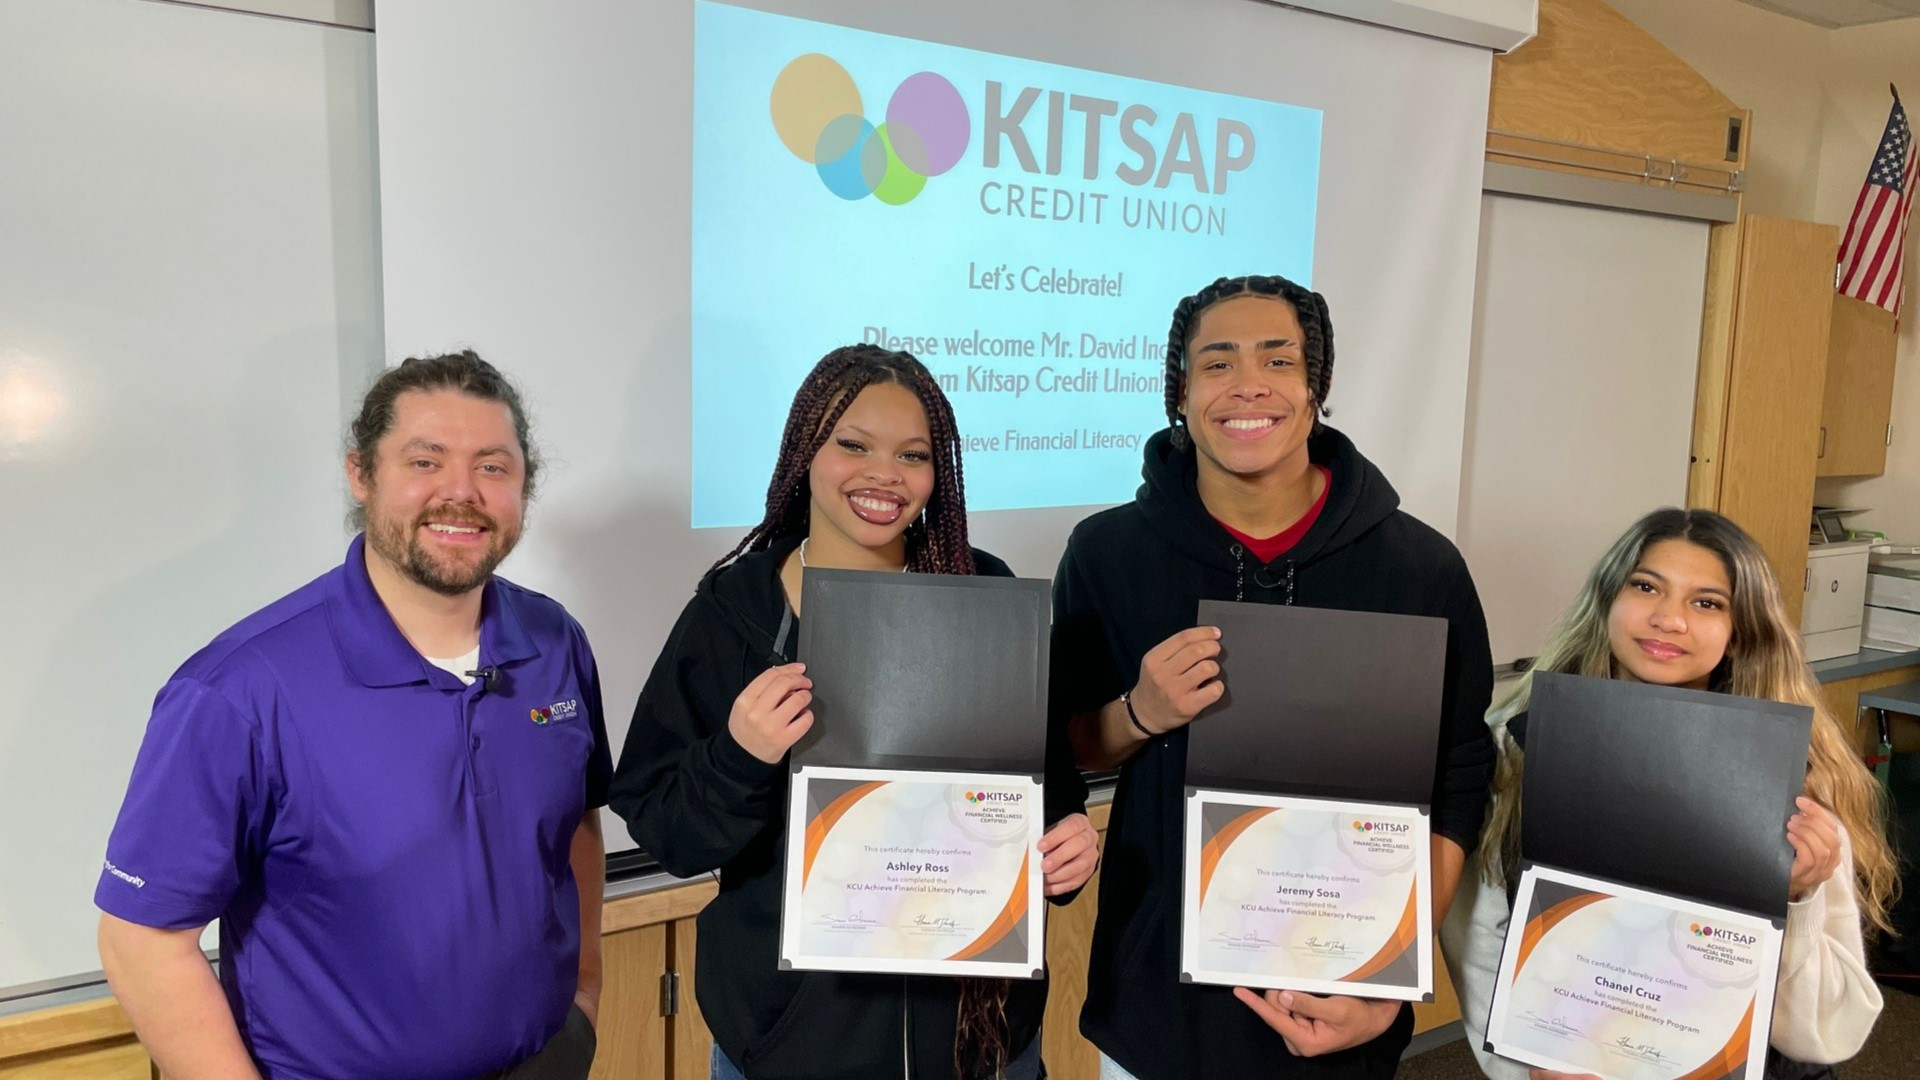 Taxes, credit, budgets are subjects these grads-to-be want to learn more about. Story sponsored by Kitsap Credit Union.